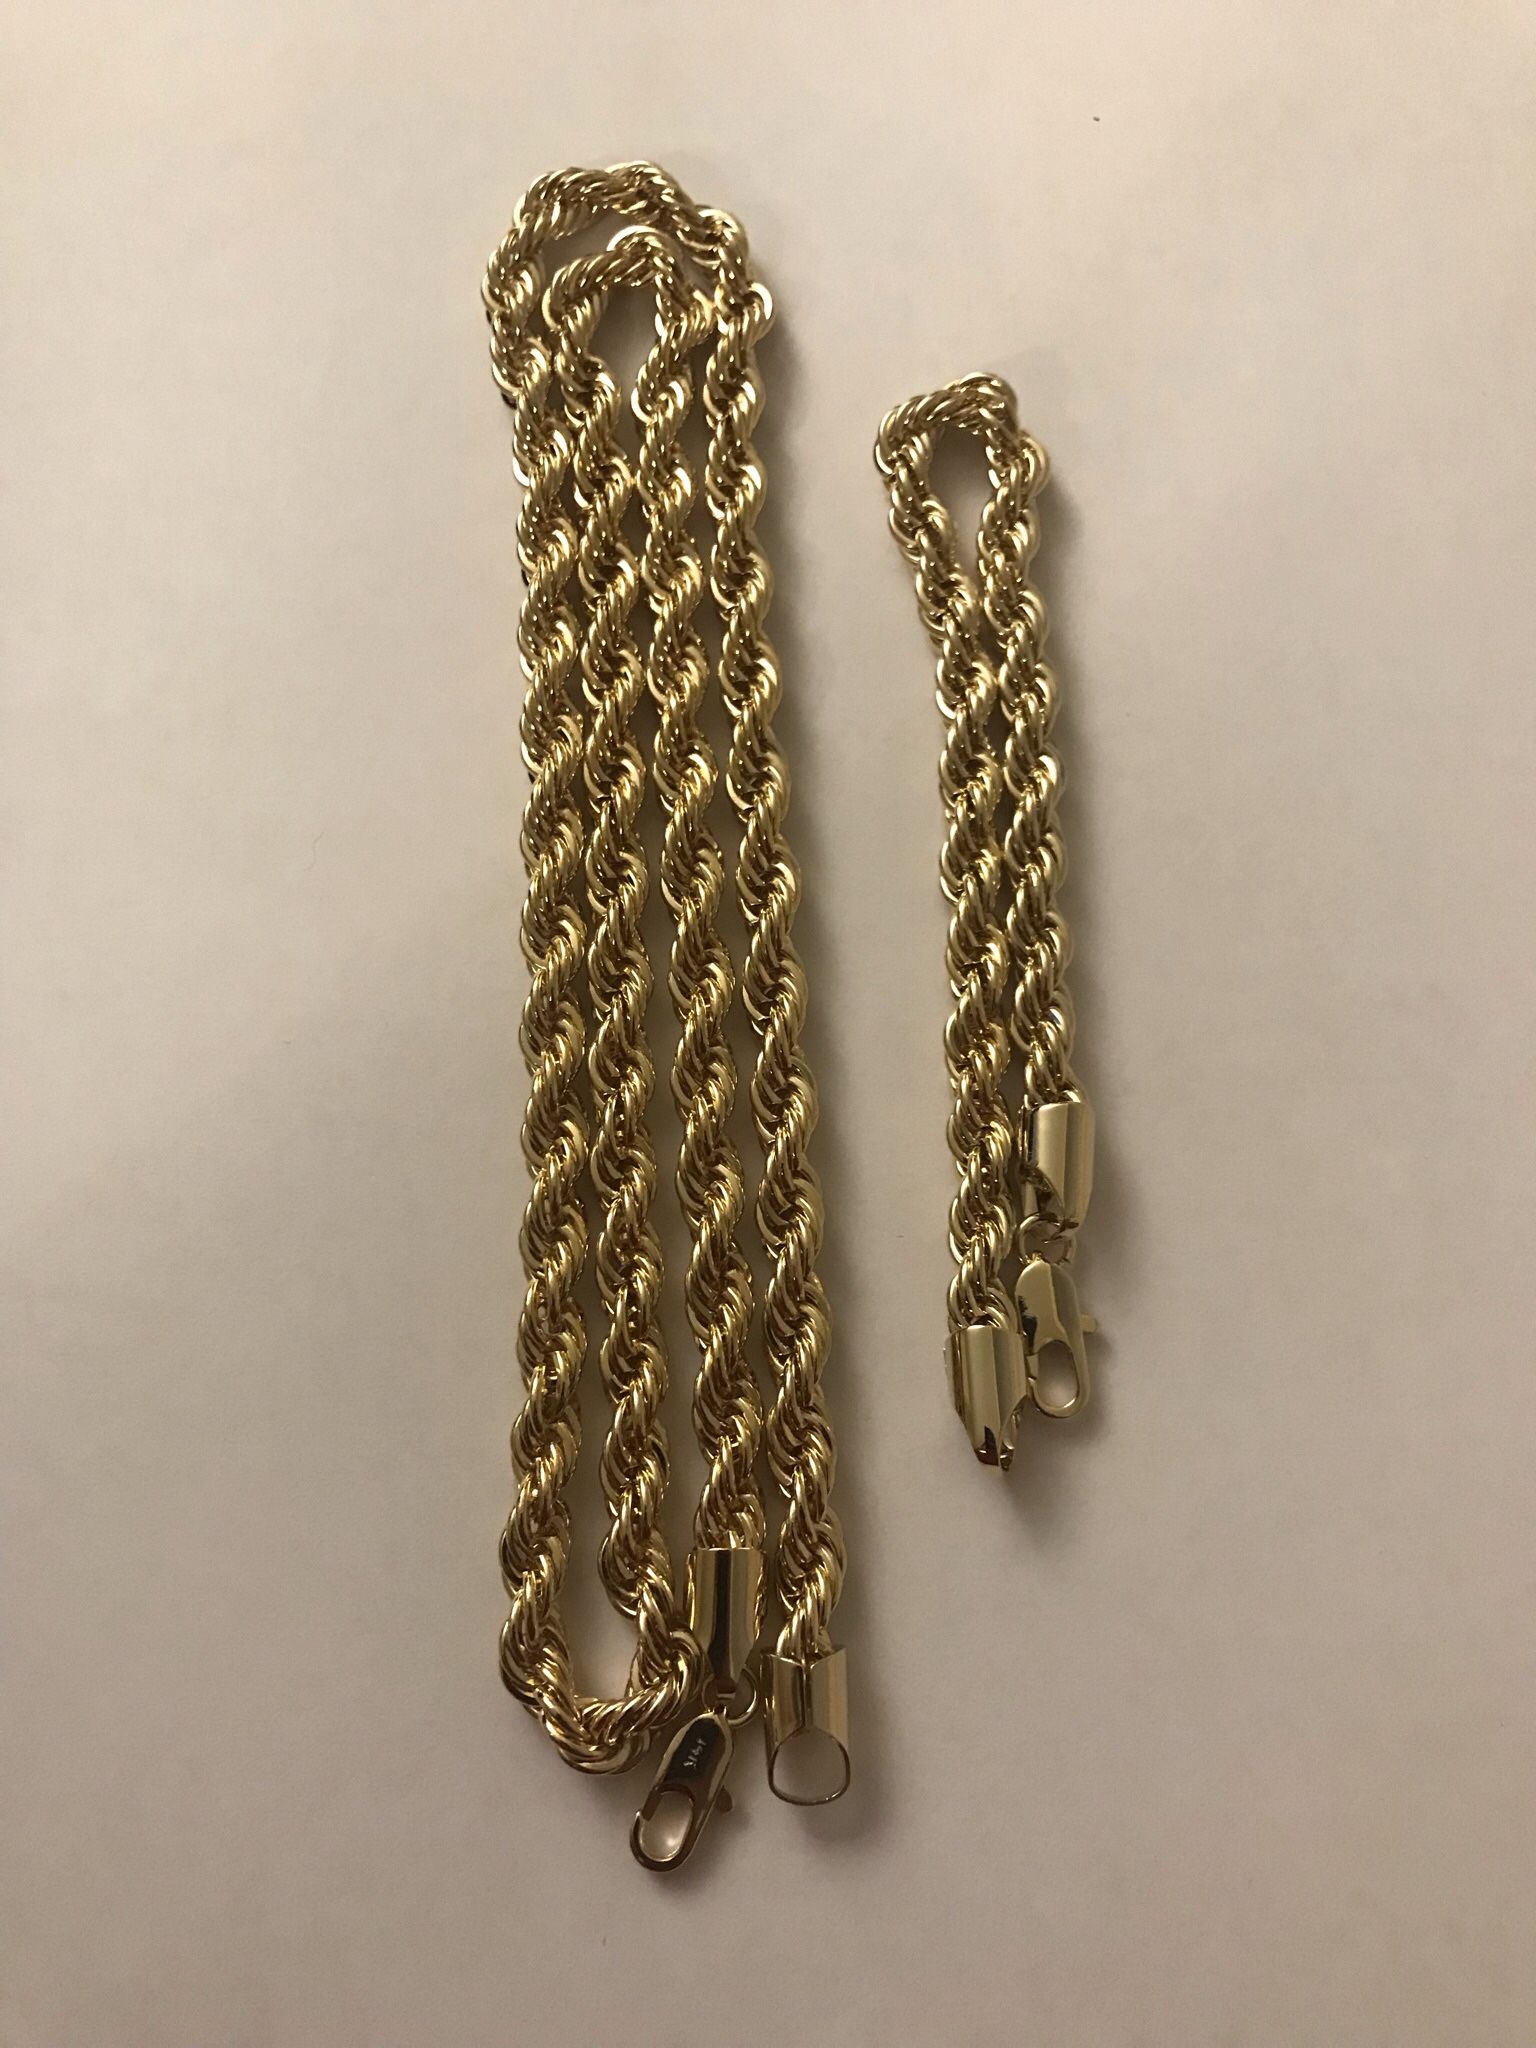 14k Gold Plated Rope Chain And Bracelet 24” And 8”